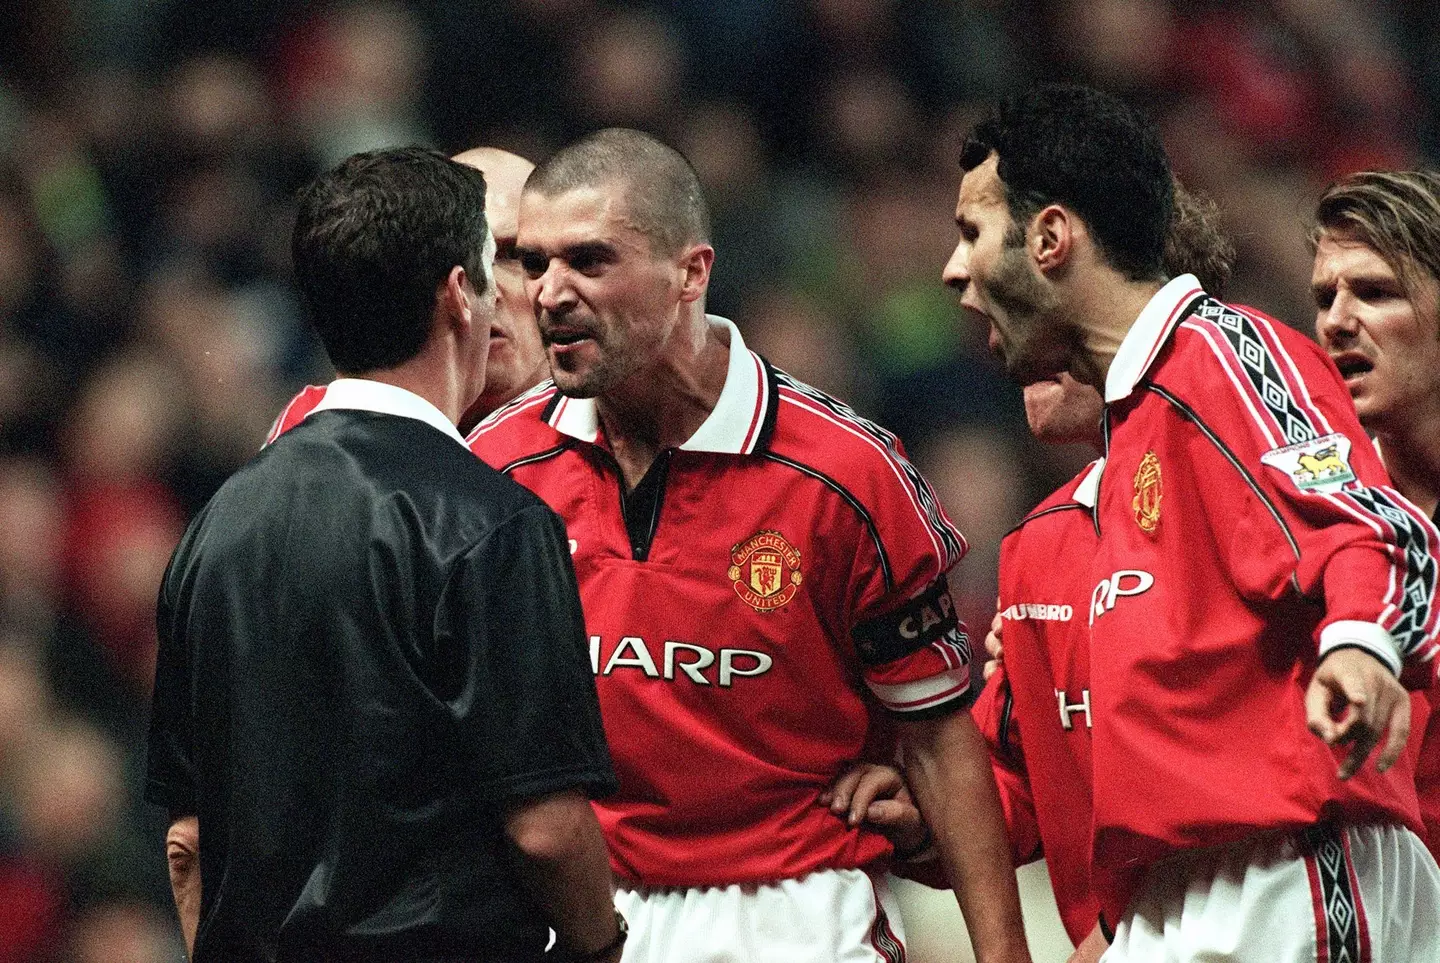 Keane arguing with a referee. (Image